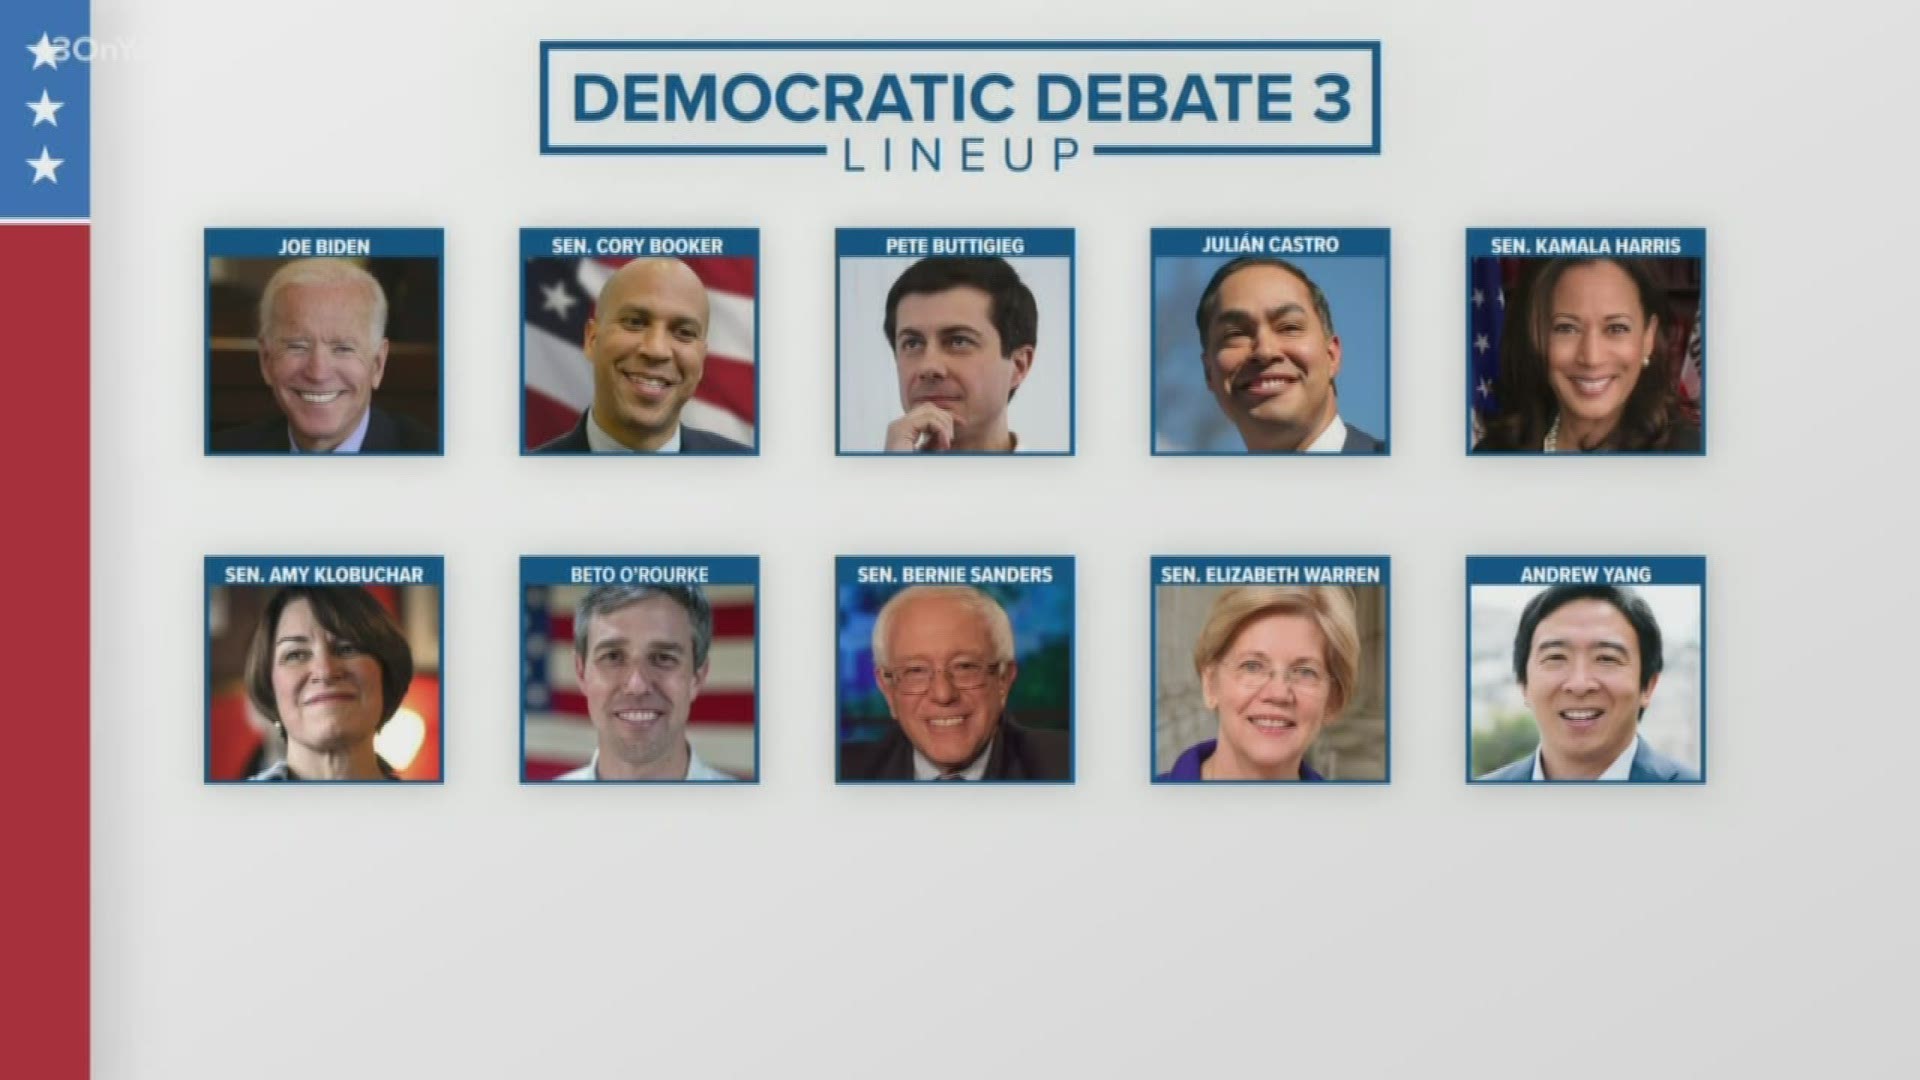 The lineup of presidential candidates who made the debate stage was announced on Aug. 29.